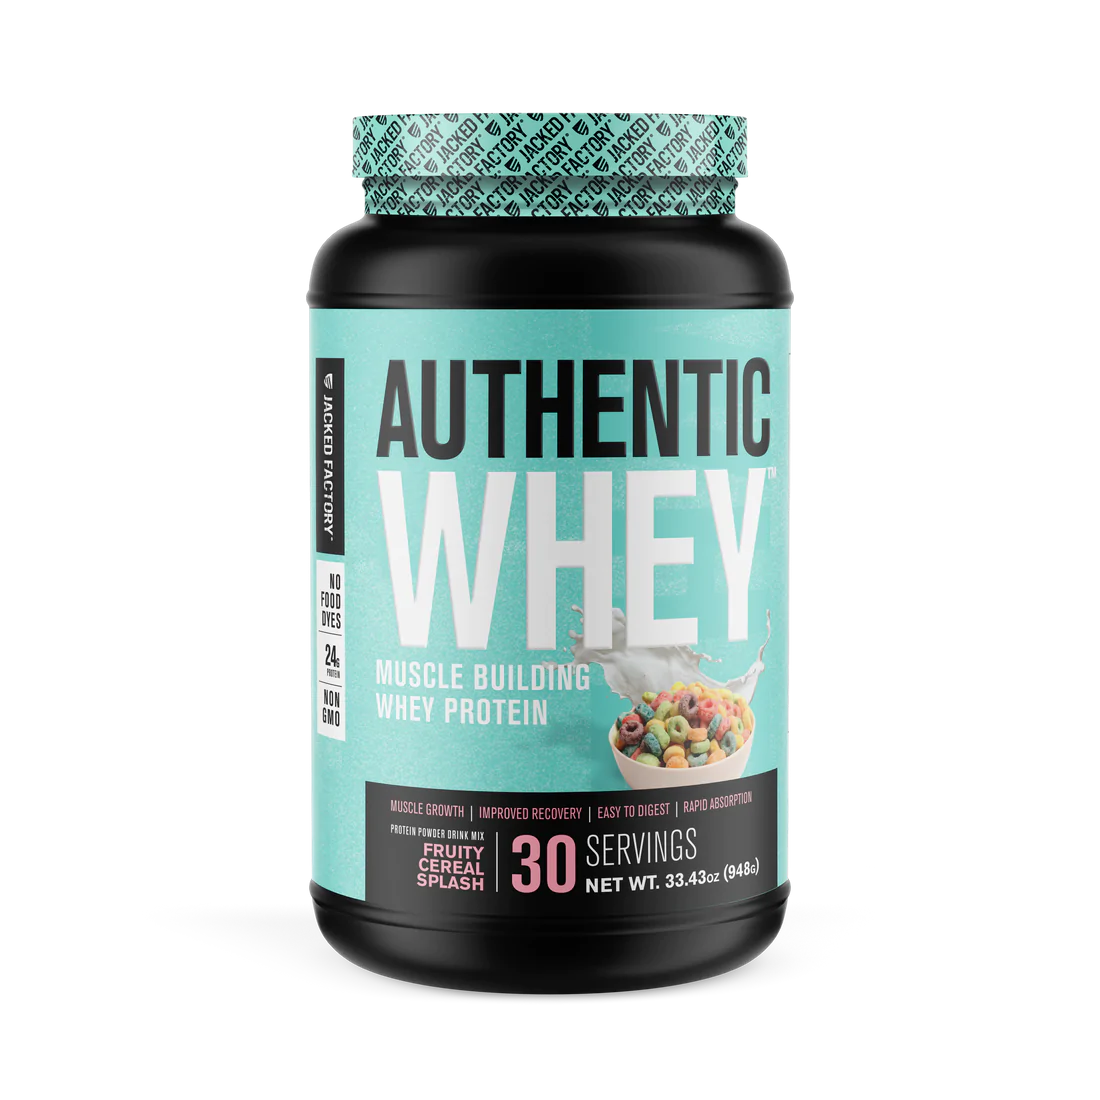 Protein thực phẩm bổ sung đạm Authentic Whey Jacked Factory: Made in USA 30 lần dùng